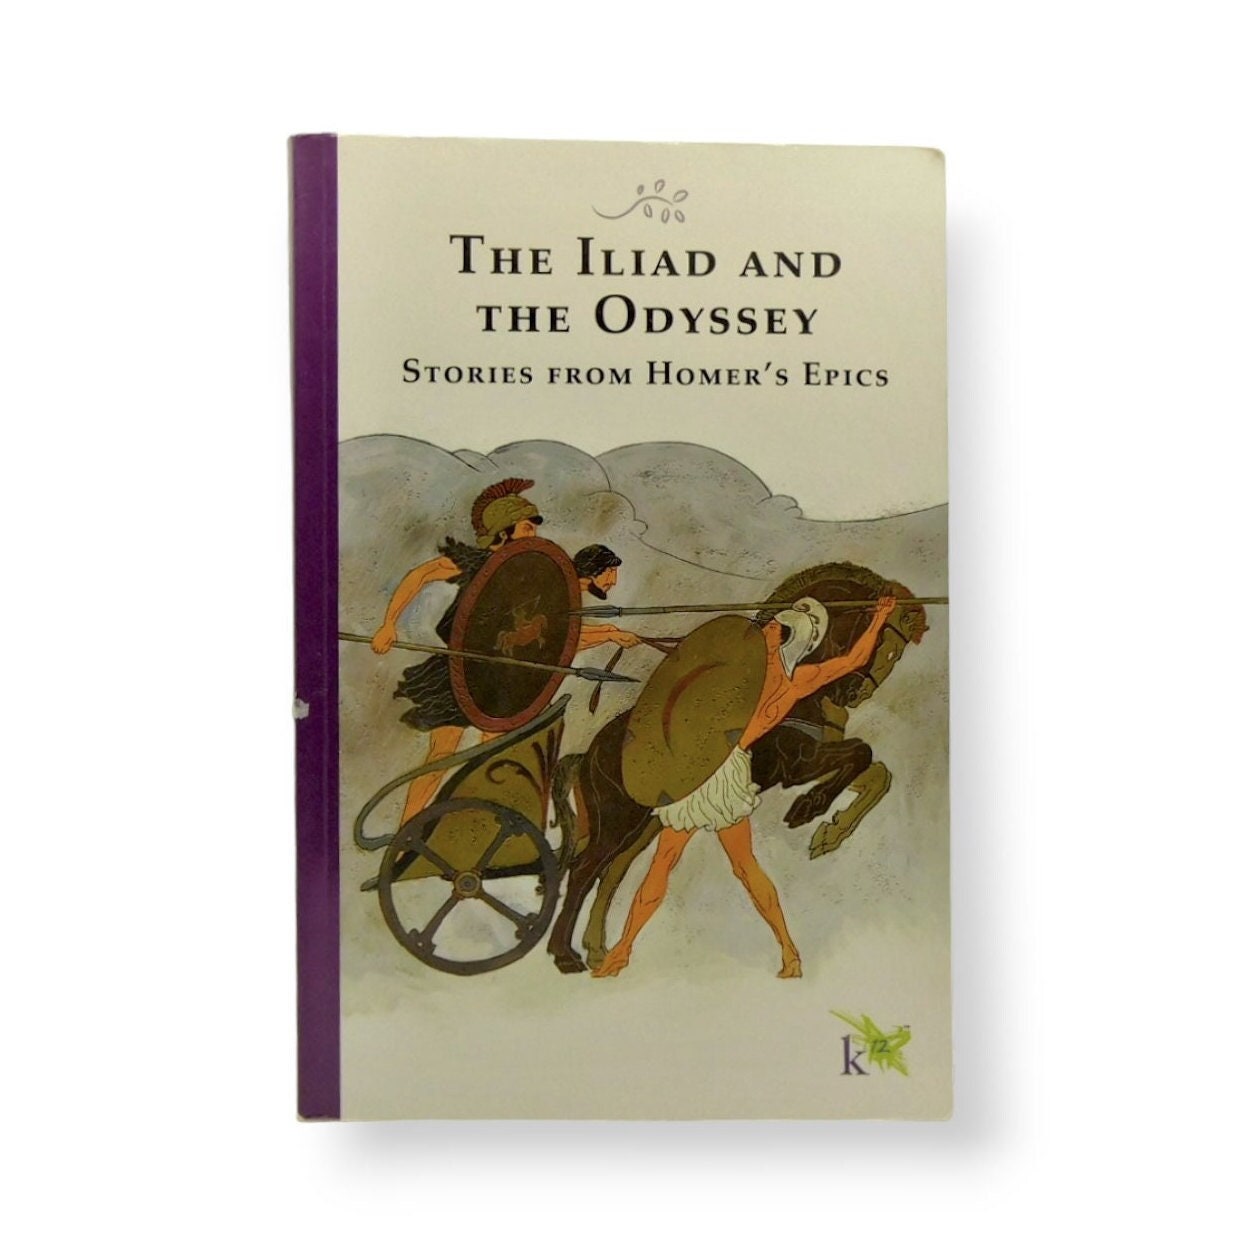 The Iliad And The Odyssey: Stories From Homer's Epics 2003